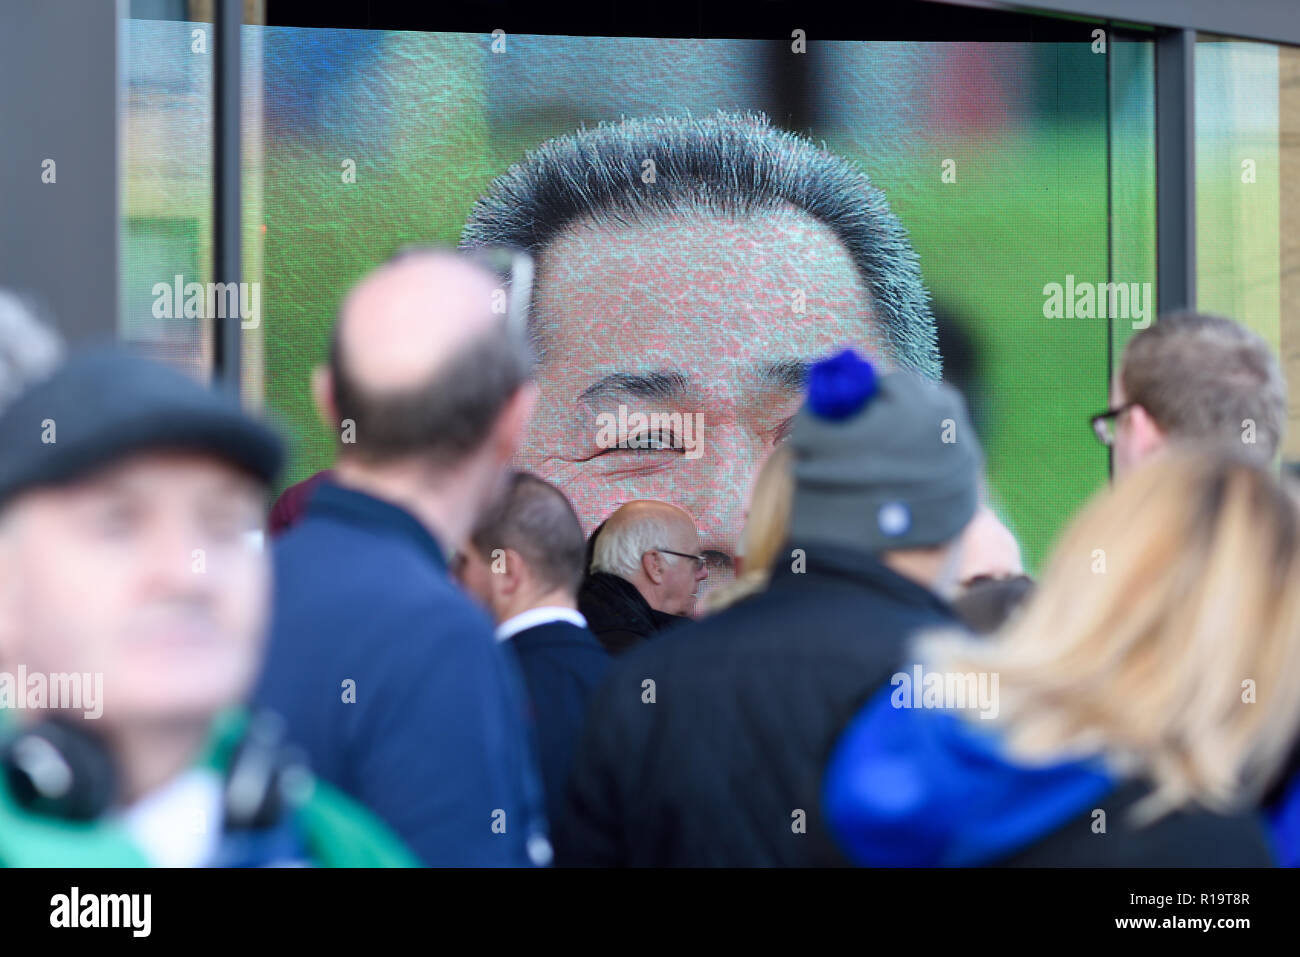 Leicester, UK. 10th Nov 2018. Leicester City FC Supporters and fans from other clubs are paying tribute to chairman Vichai Srivaddhanaprabha, who was among five people killed in the helicopter crash outside the stadium on October 27. Thousands took part leaving from Jubilee square just over a mile walk to King Power Stadium. Credit: Ian Francis/Alamy Live News Stock Photo